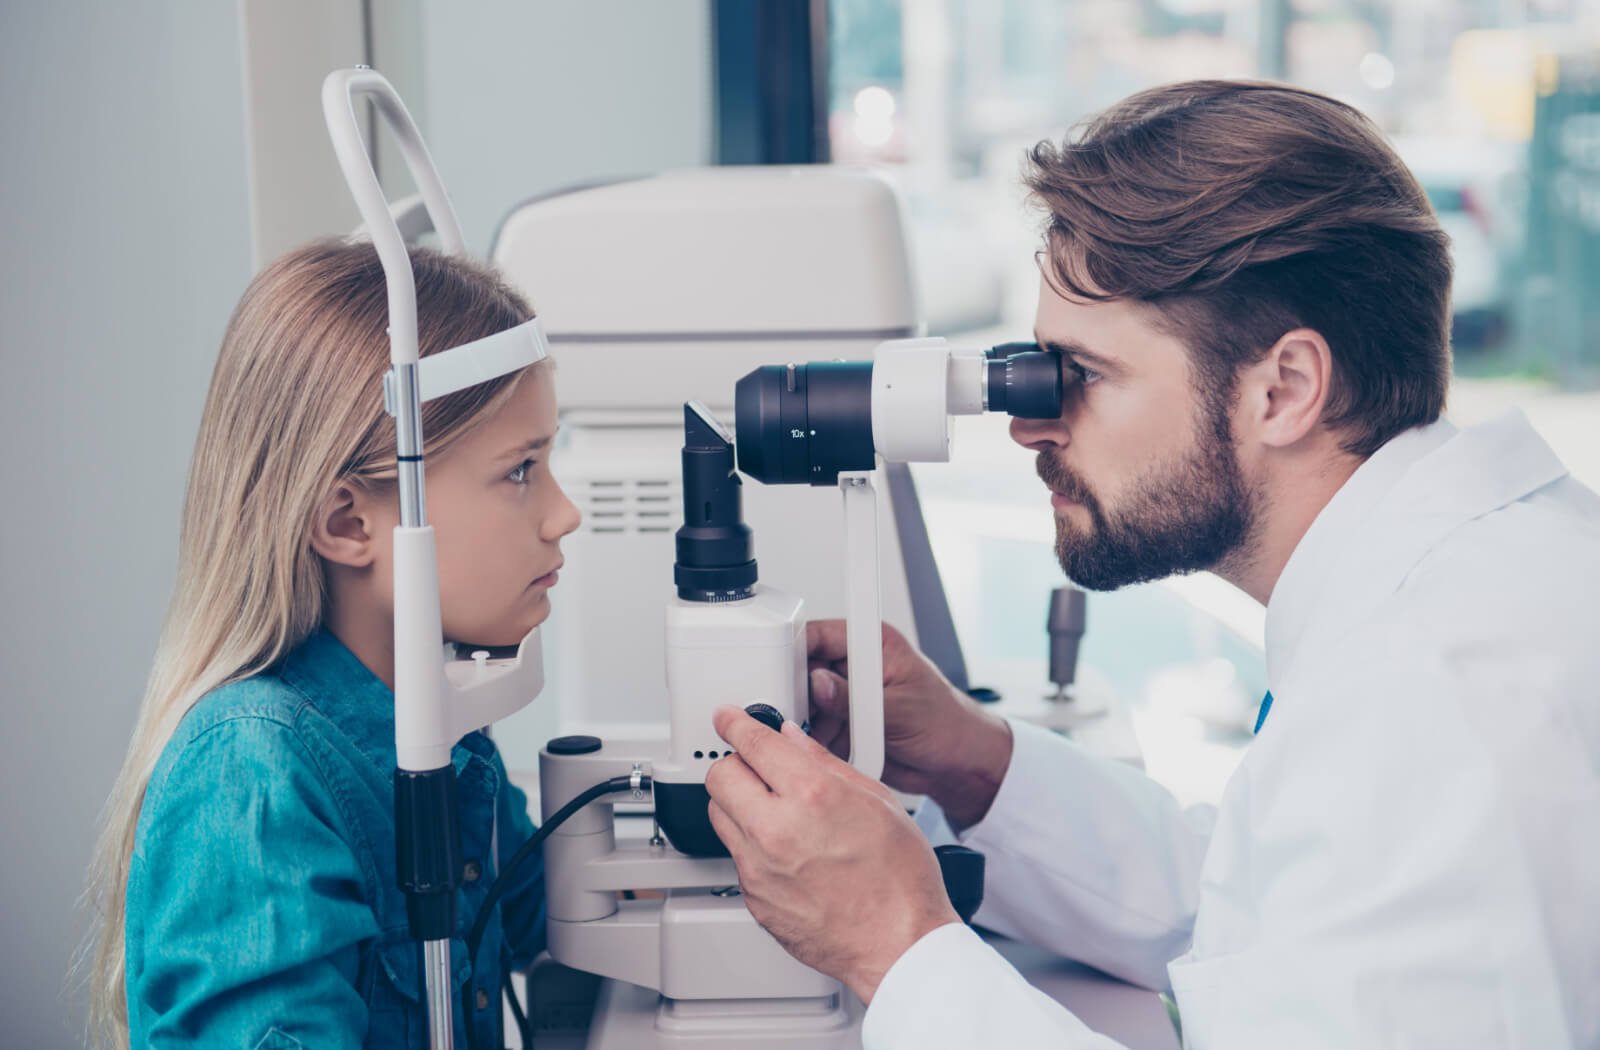 A male optometrist examining the eyes of a child using a medical device to detect potential eye problems.